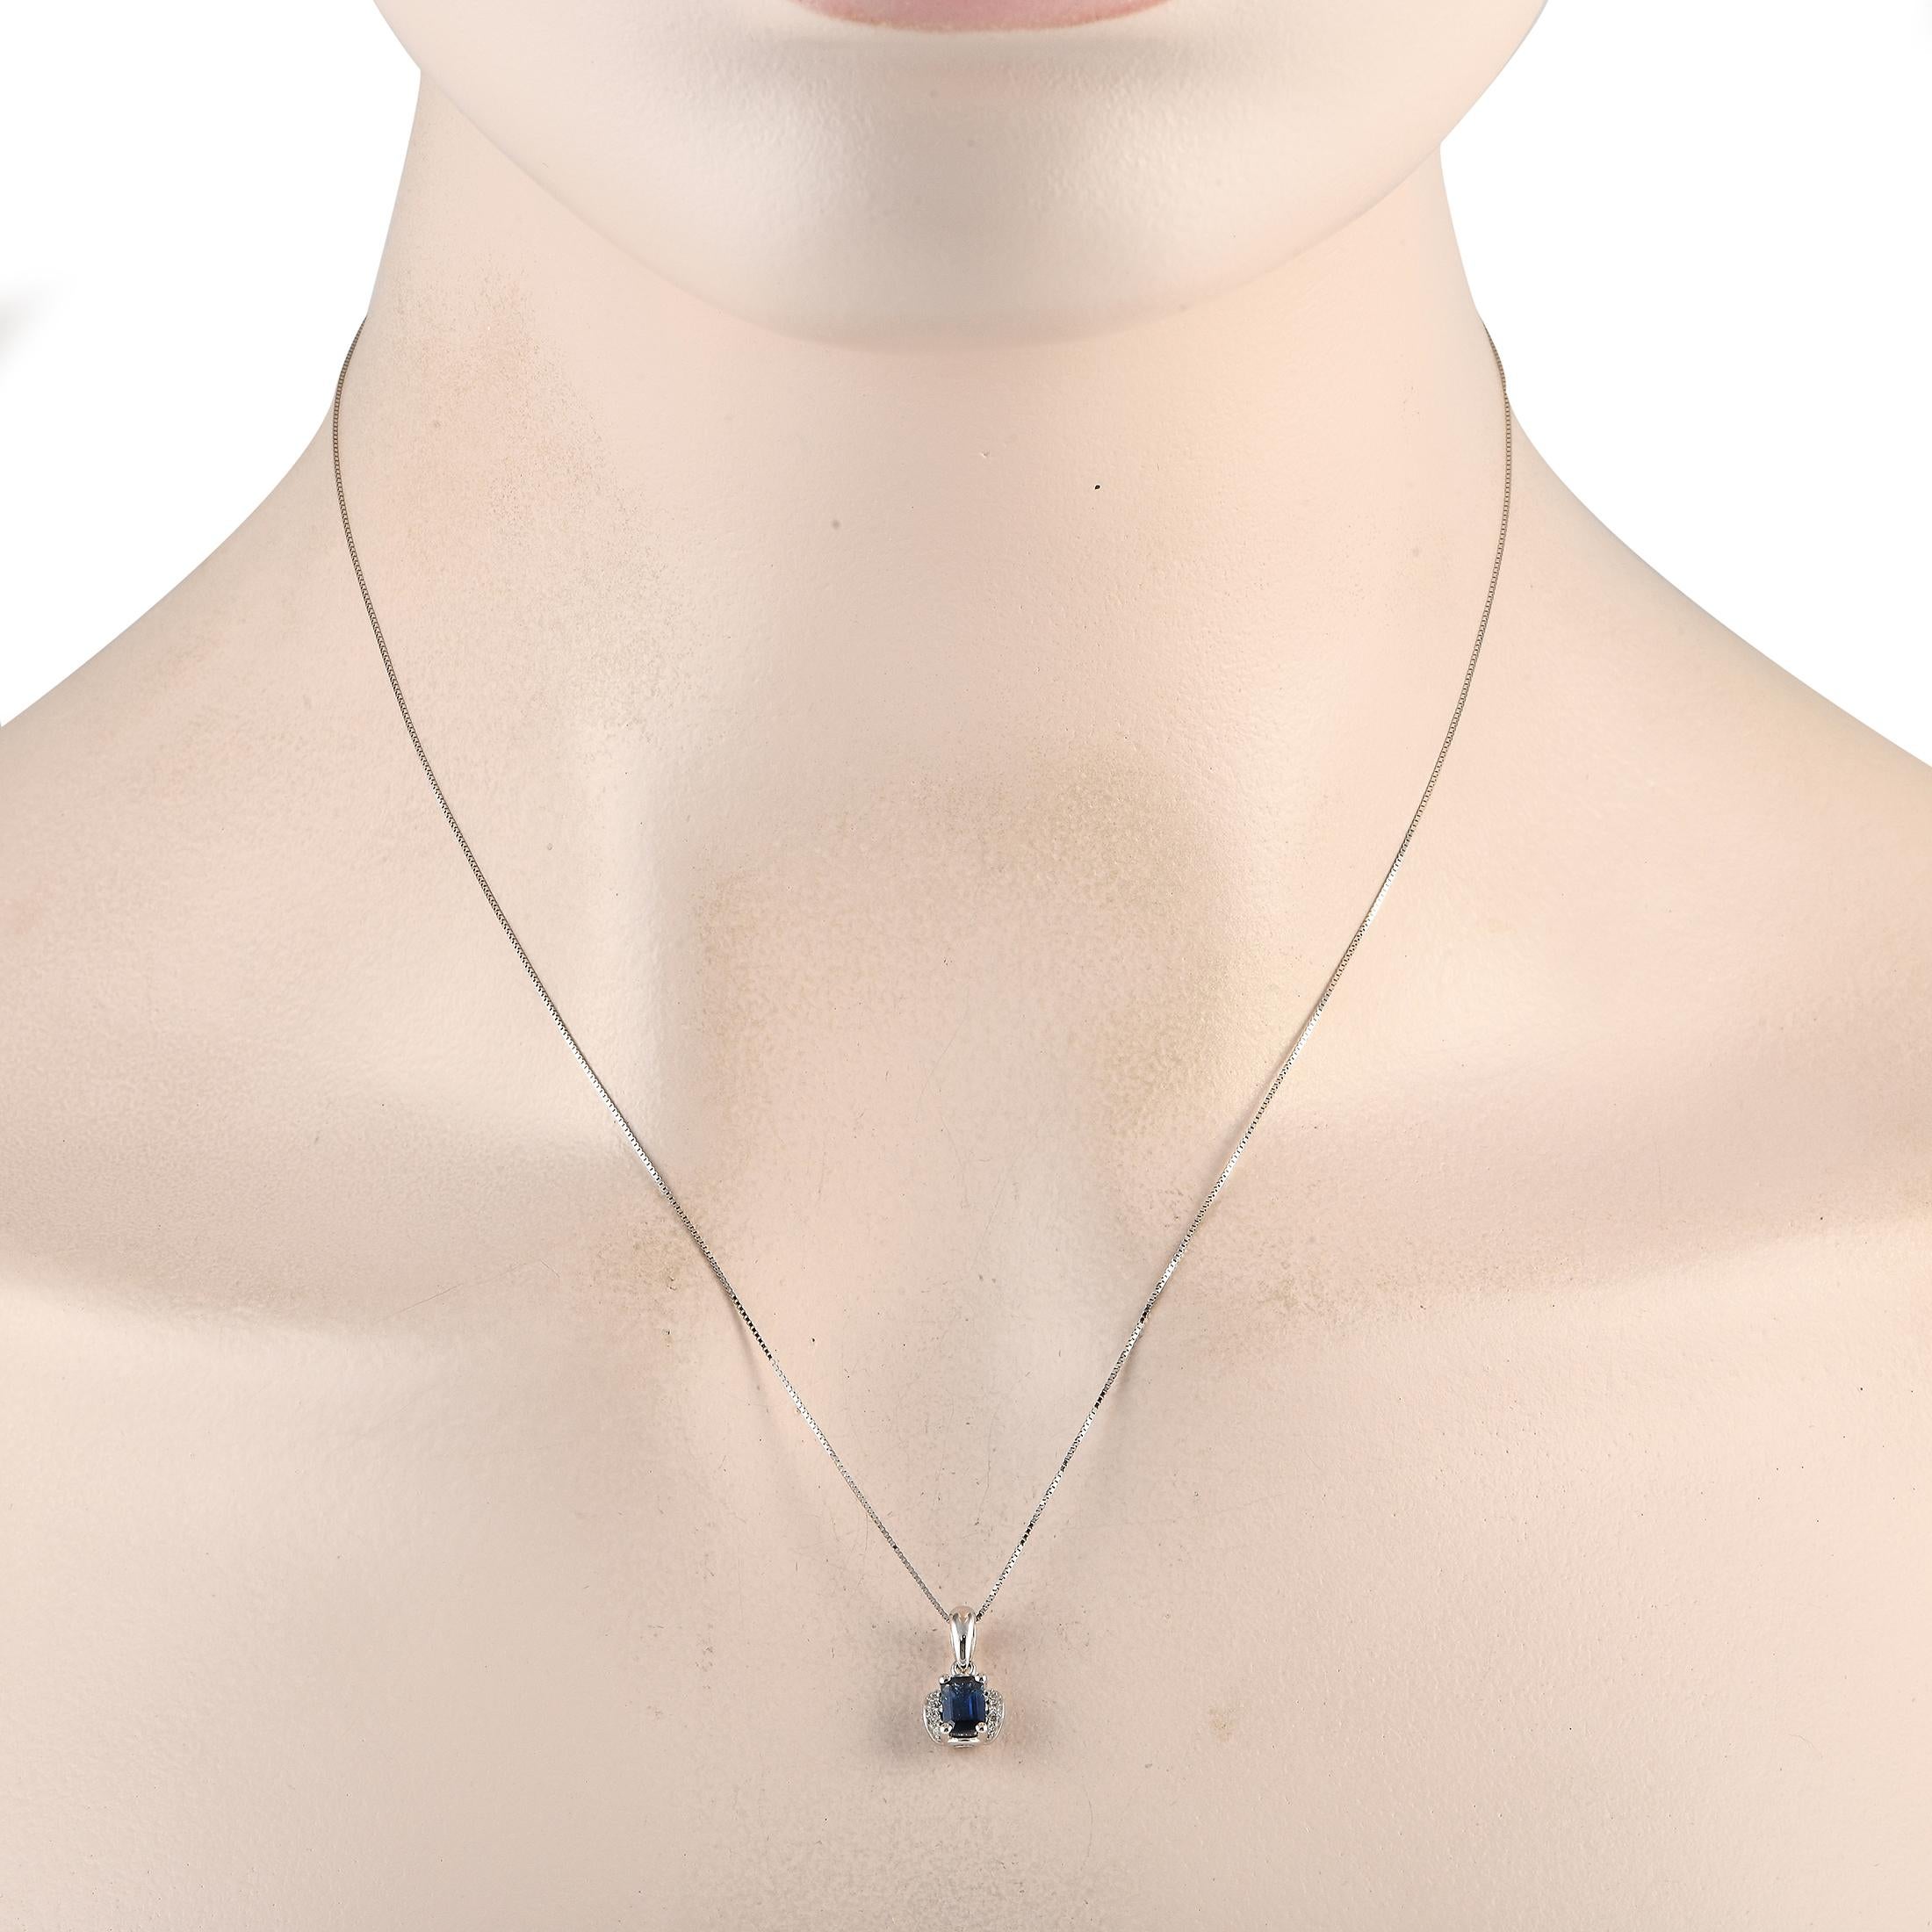 A breathtaking sapphire serves as a stunning focal point on this impeccably crafted necklace. The 14K white gold pendant measures 0.50 long by 0.25 wide and includes diamond accents totaling 0.03 carats. This elegant accessory comes complete with an